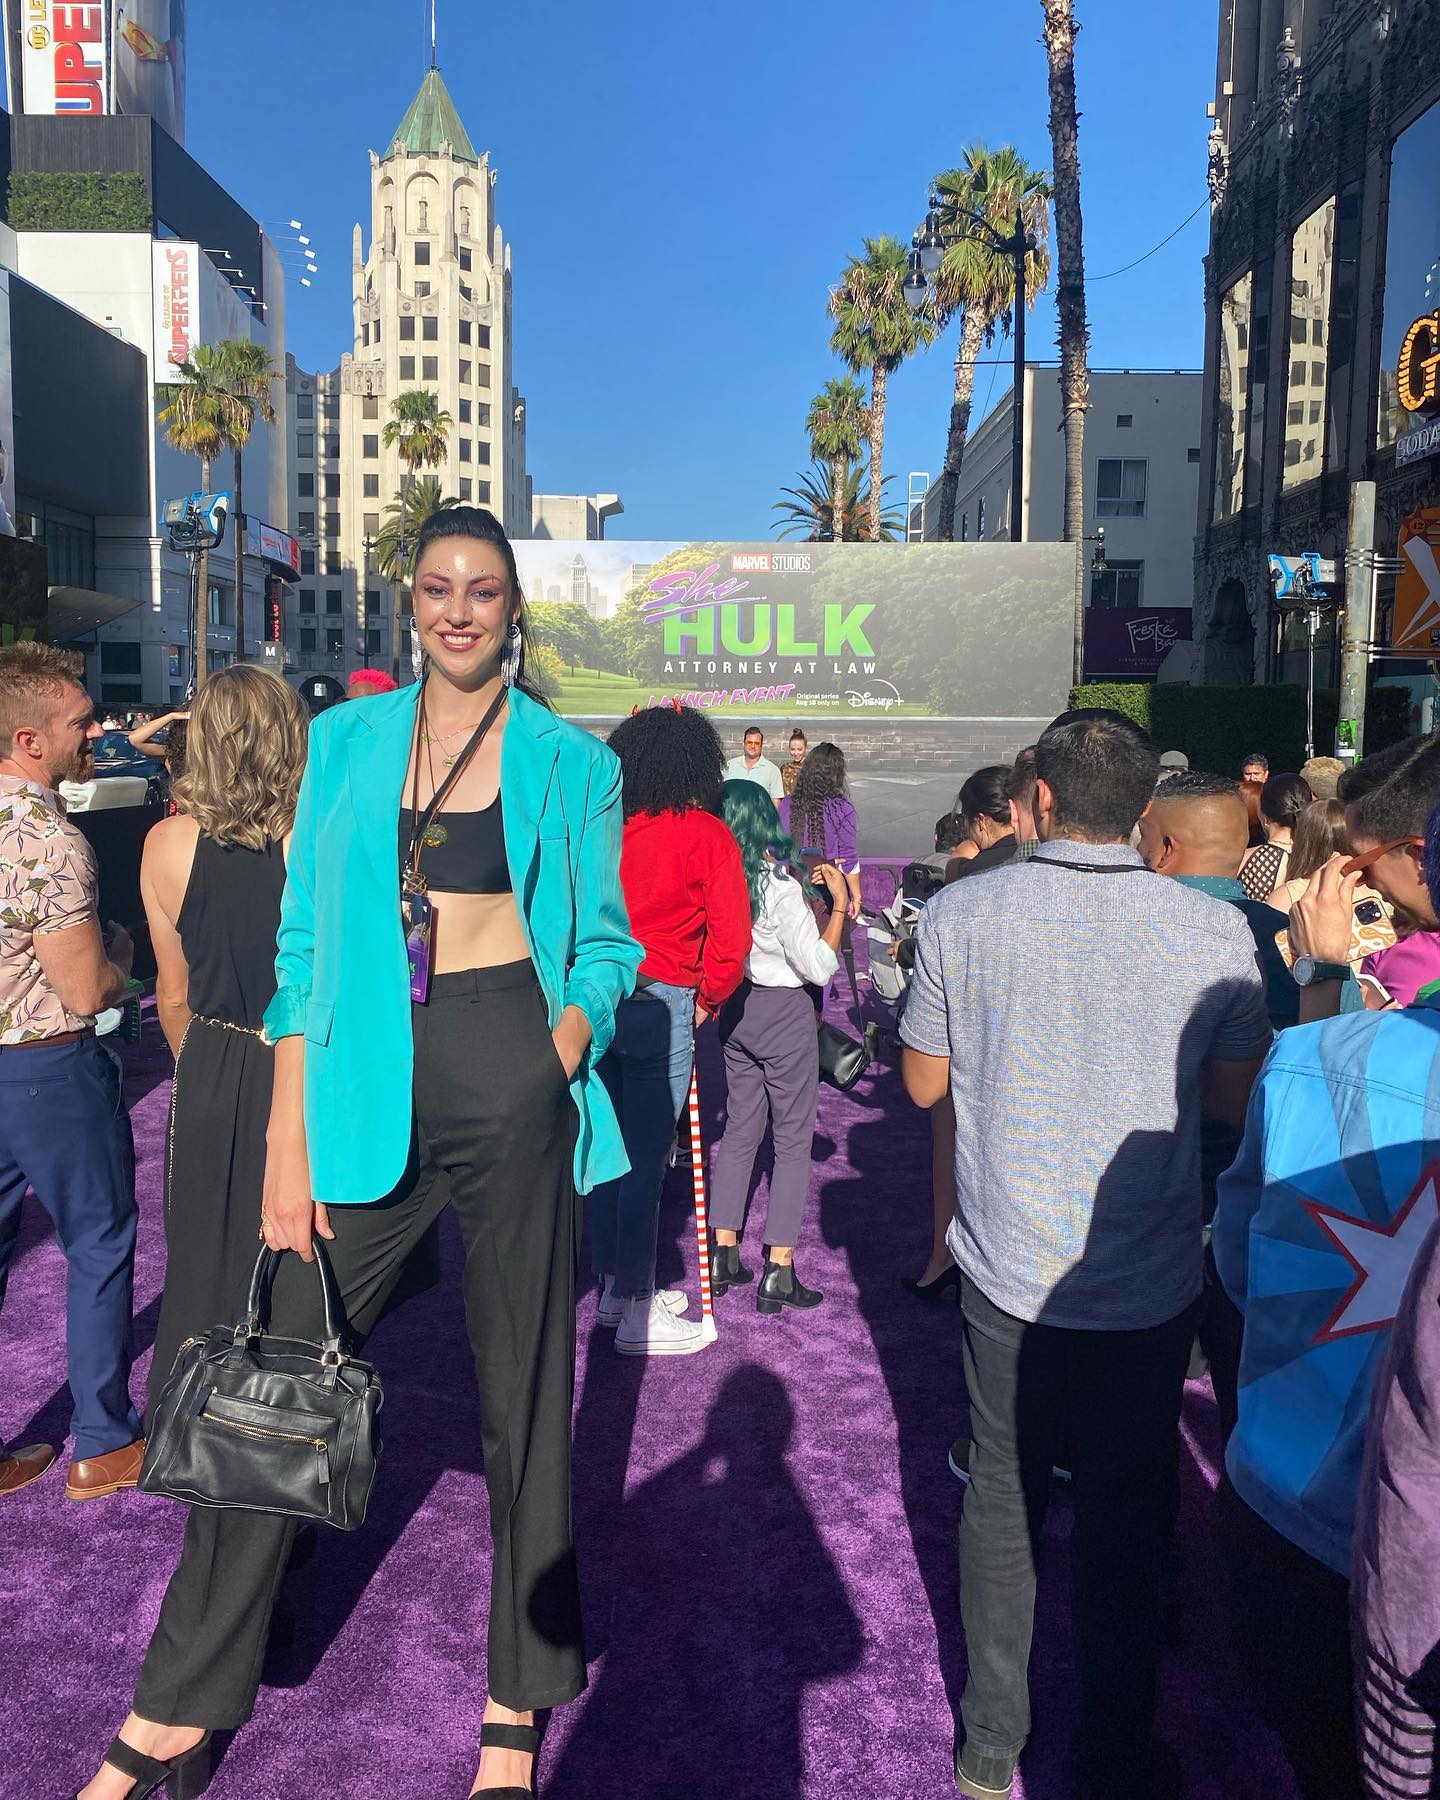 @shehulkofficial 💚💜 so excited to see She-Hulk coming out!! Grateful to have had the opportunity to work as the on set “She-Hulk” VFX Reference/ stunt performer (for some scenes)😊 and to be able to work with an amazing group of talented people 😊💚💜🤙🏼
💖😇Special shout out to my incredible talent agency / agent Lisa at @ohsosmall 💖😇